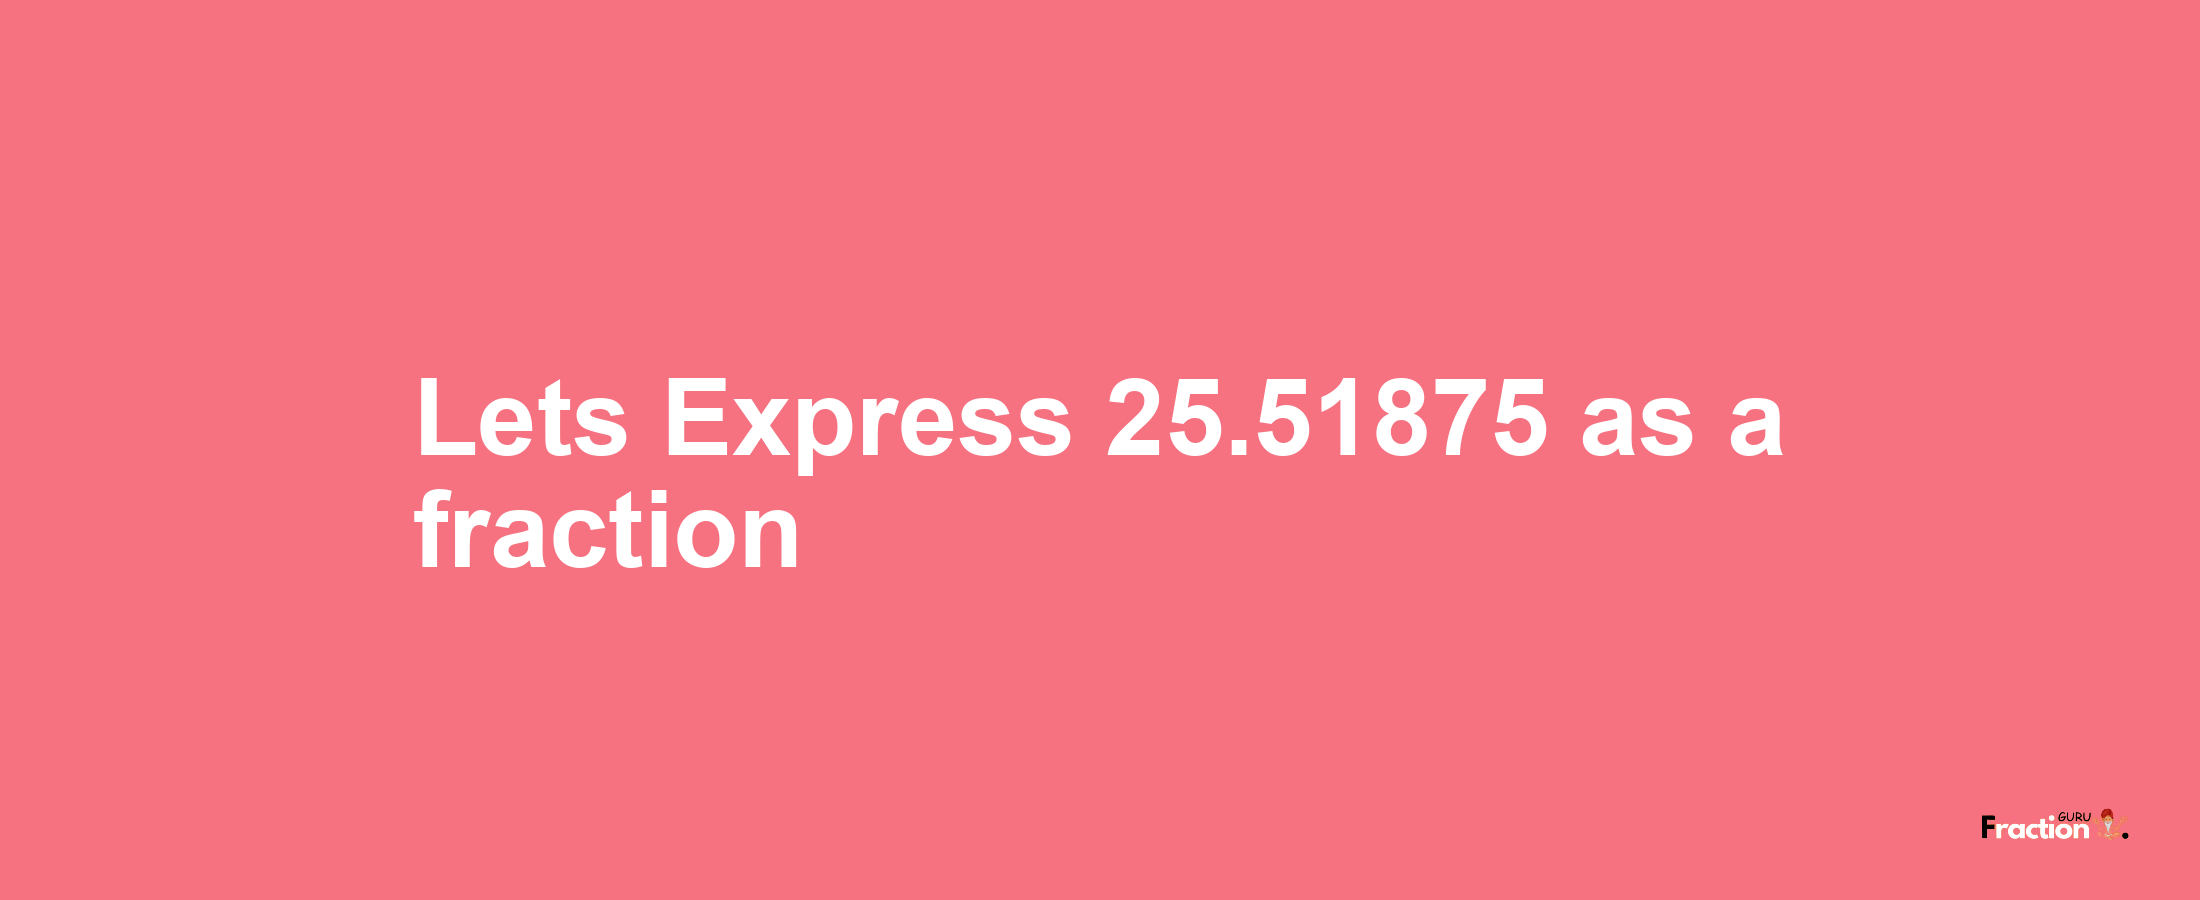 Lets Express 25.51875 as afraction